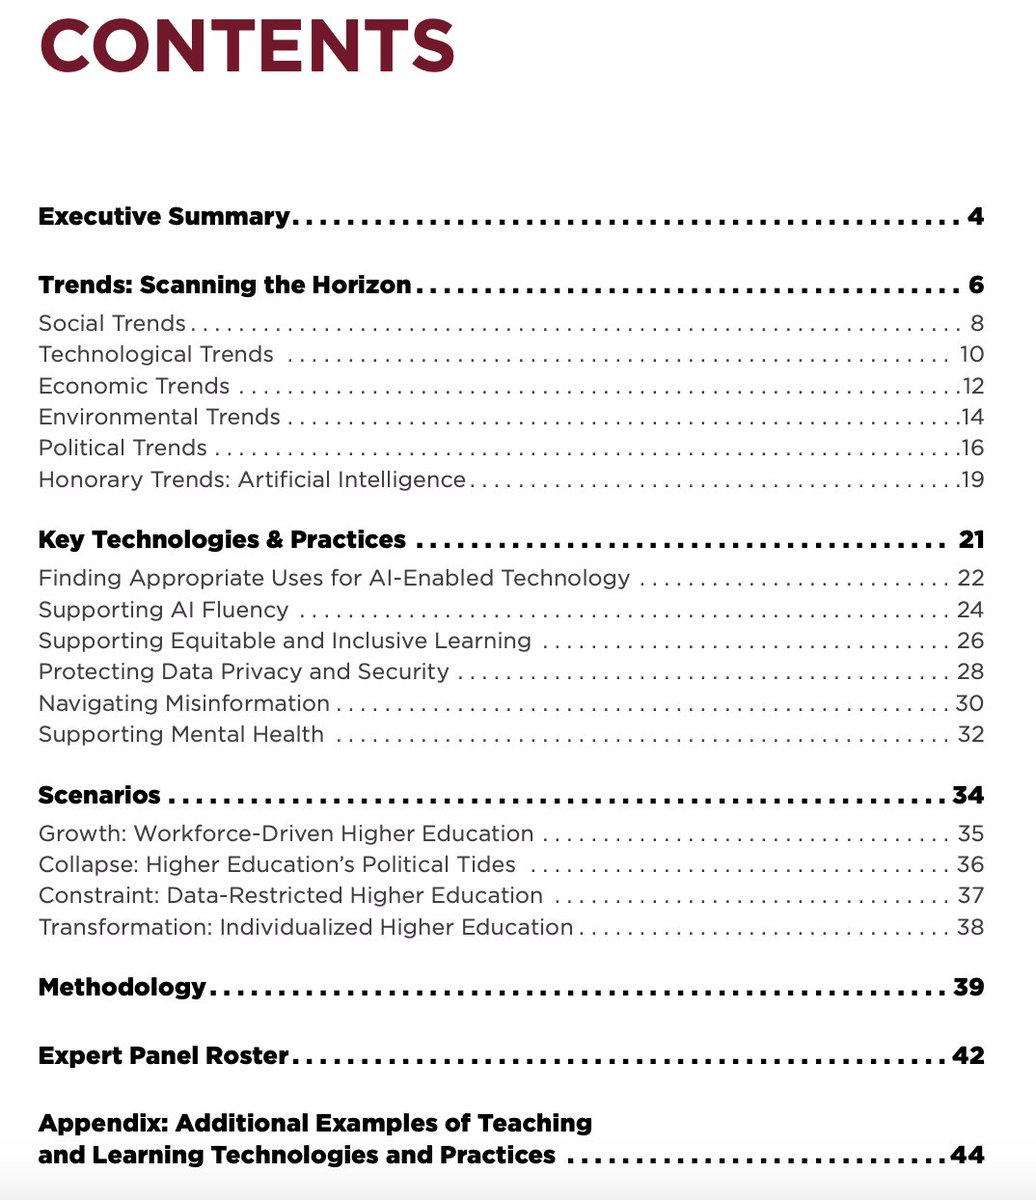 2024 @educause Horizon Report | #Teaching & #Learning Edition Profiles trends, key tech & practices shaping the future of teaching & learning & envisions # of scenarios library.educause.edu/resources/2024… #AIed #BlendedLearning #ChangeManagement #HumanCapacity #DataPrivacy #DataGovernance